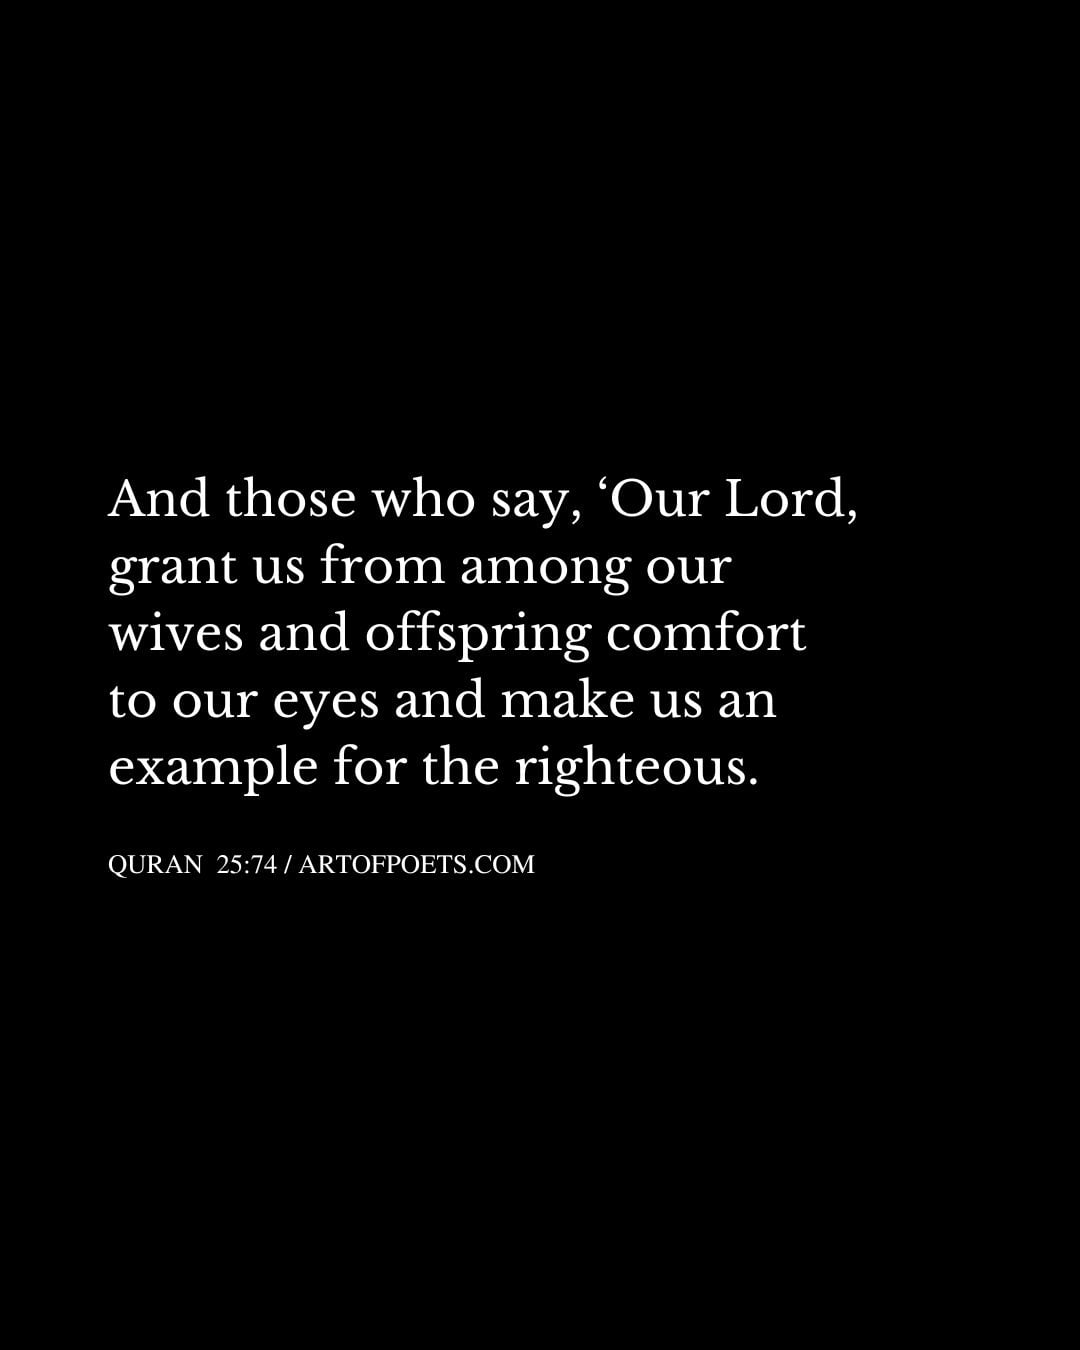 And those who say ‘Our Lord grant us from among our wives and offspring comfort to our eyes and make us an example for the righteous